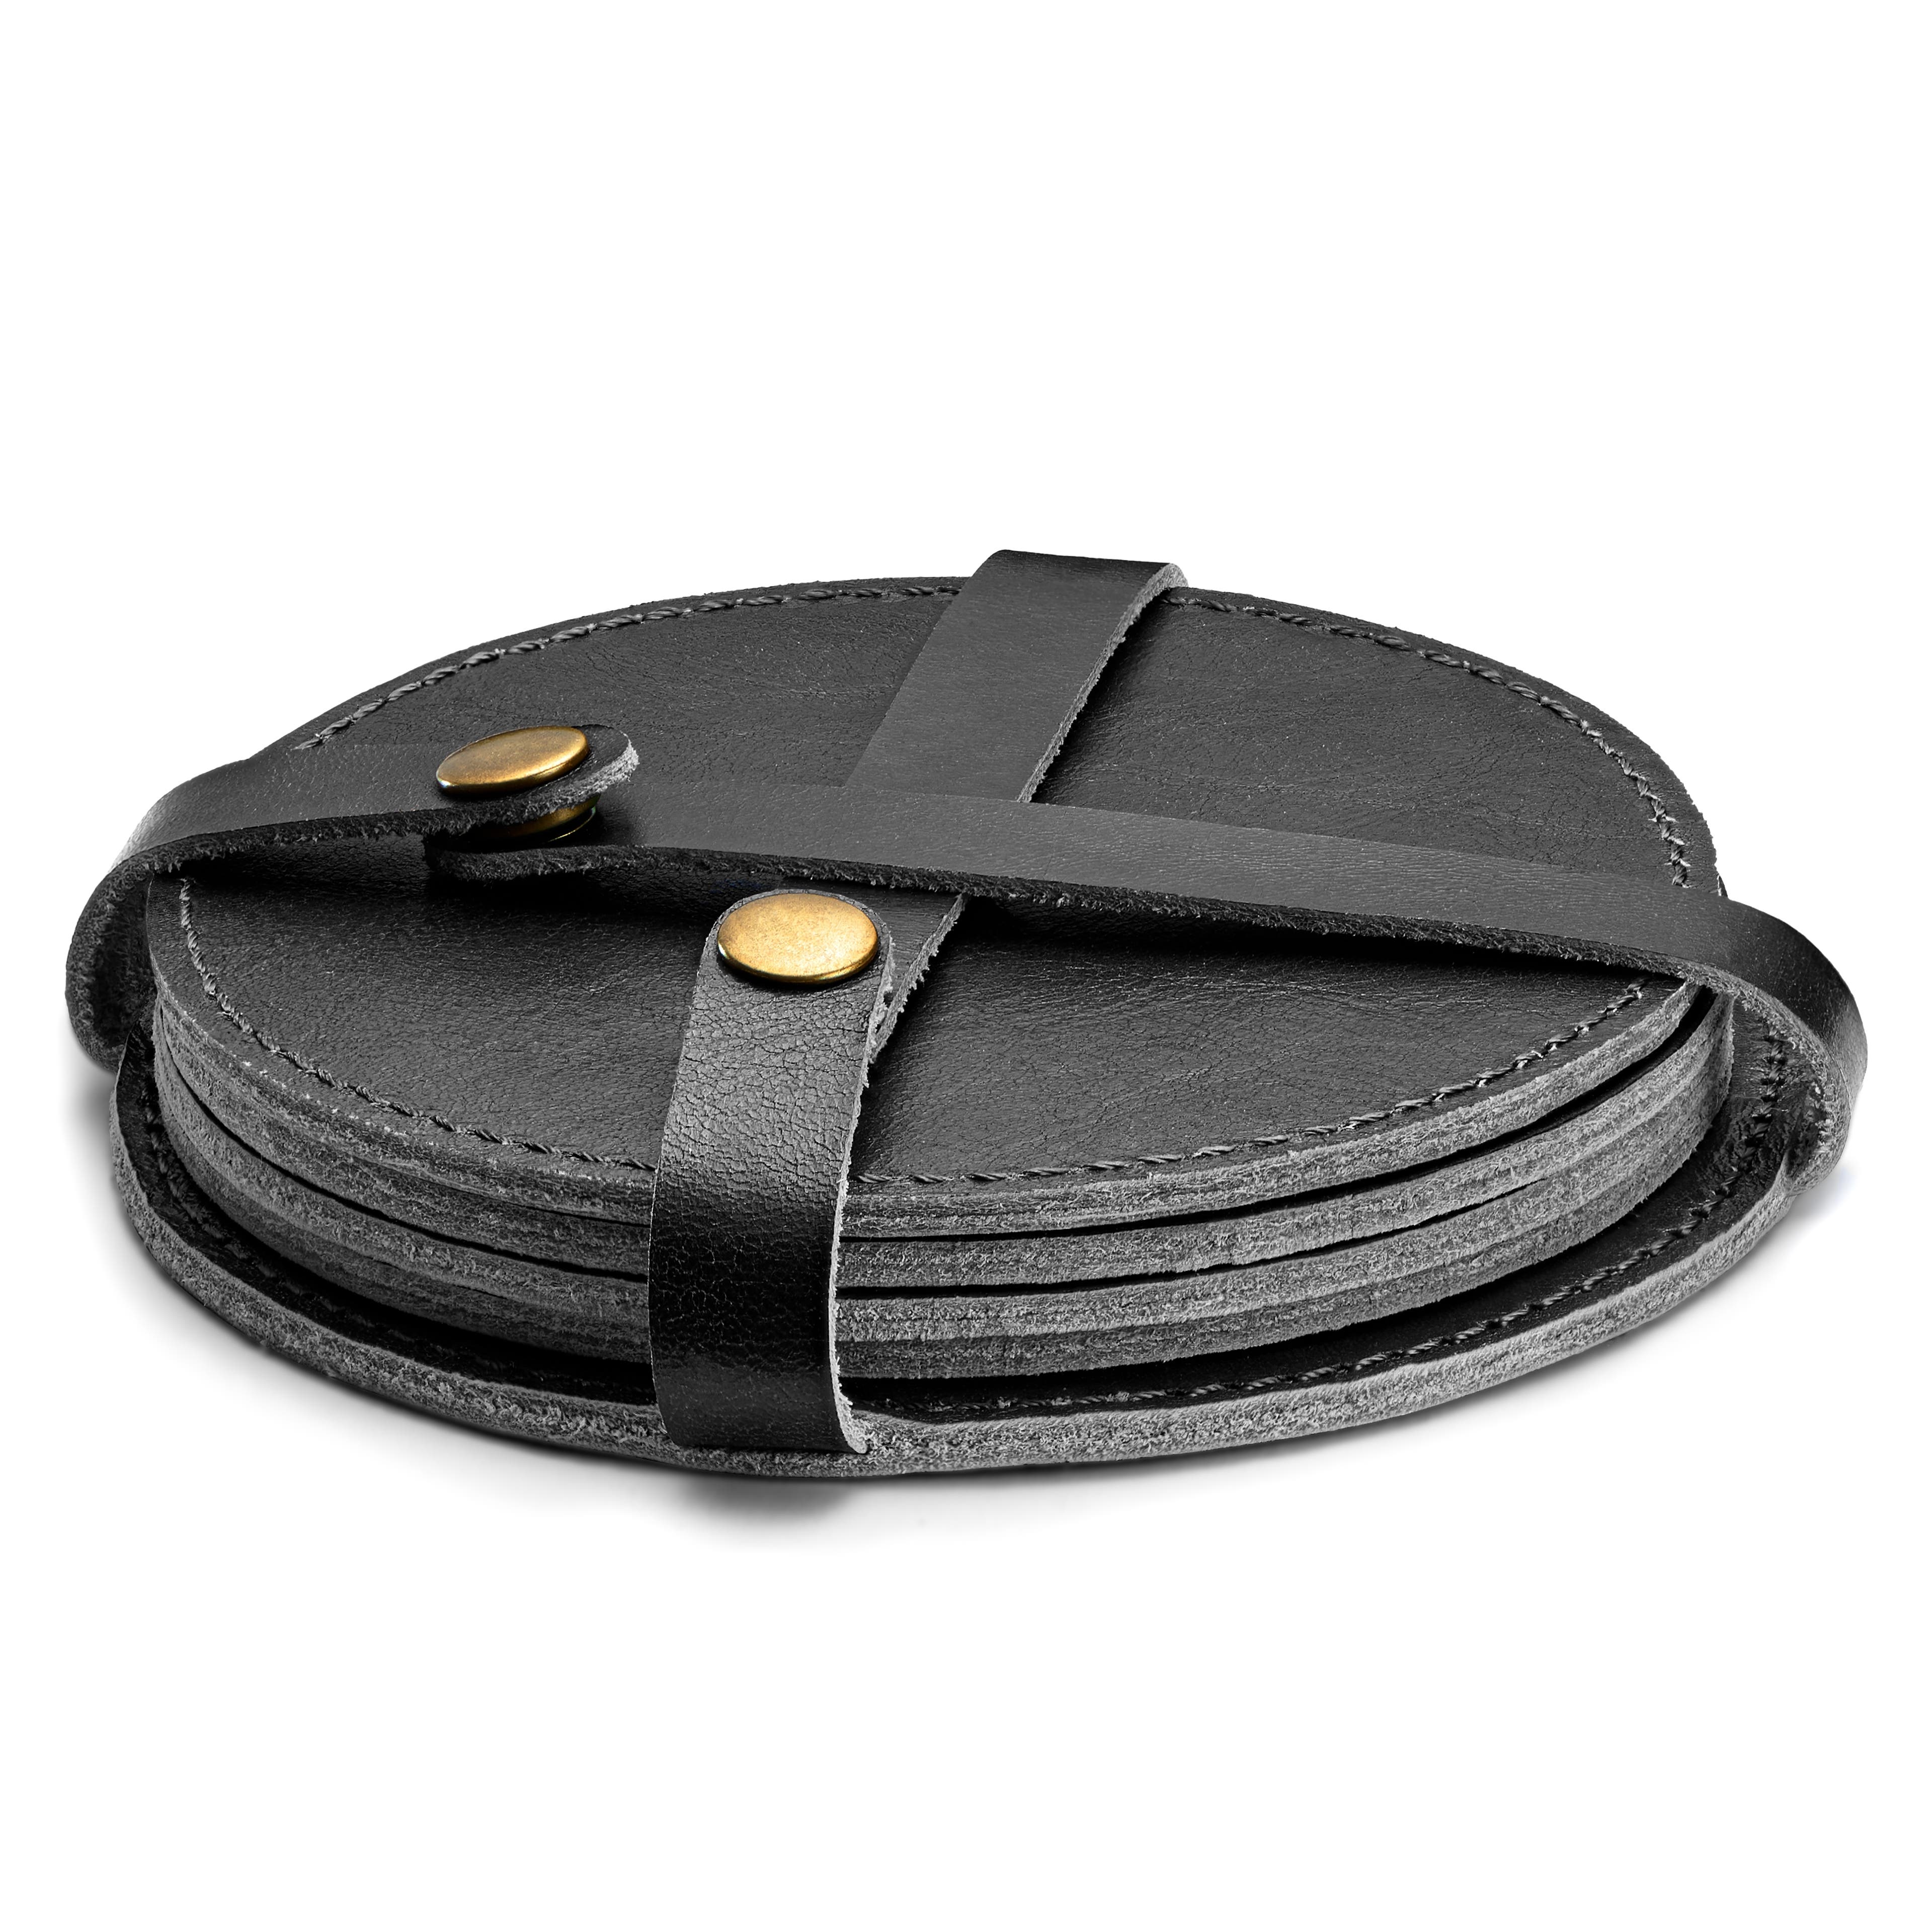 Leather Drinks Coasters and Holder x4 | Black & Round